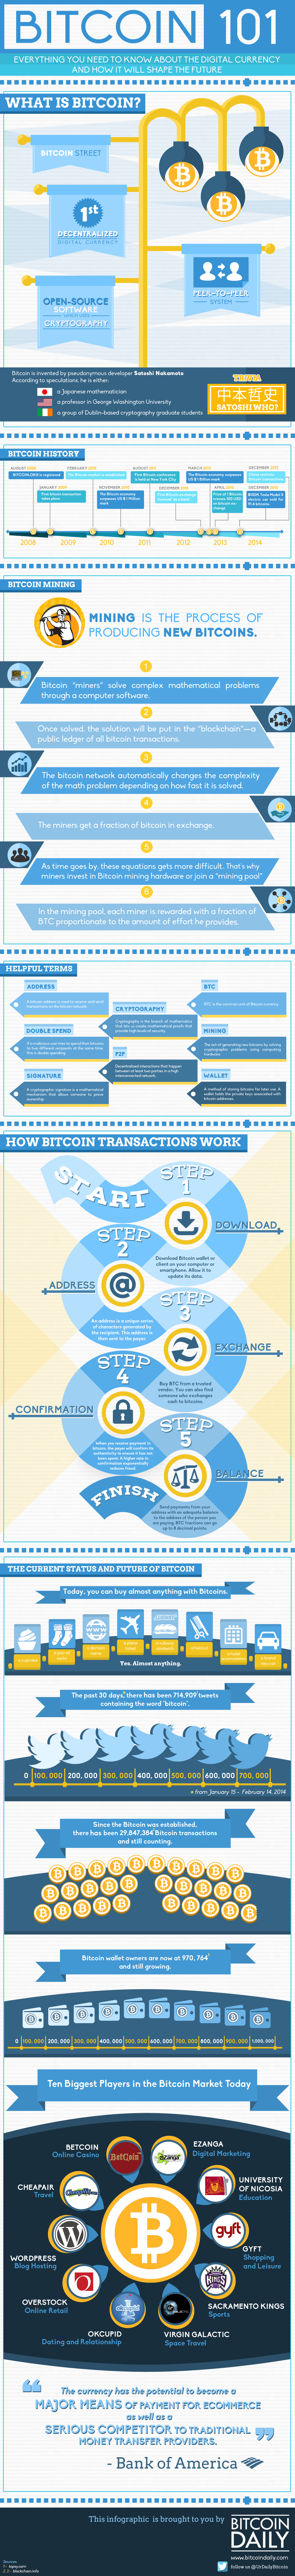 Bitcoin 101: Everything you ever wanted to know about BitCoins